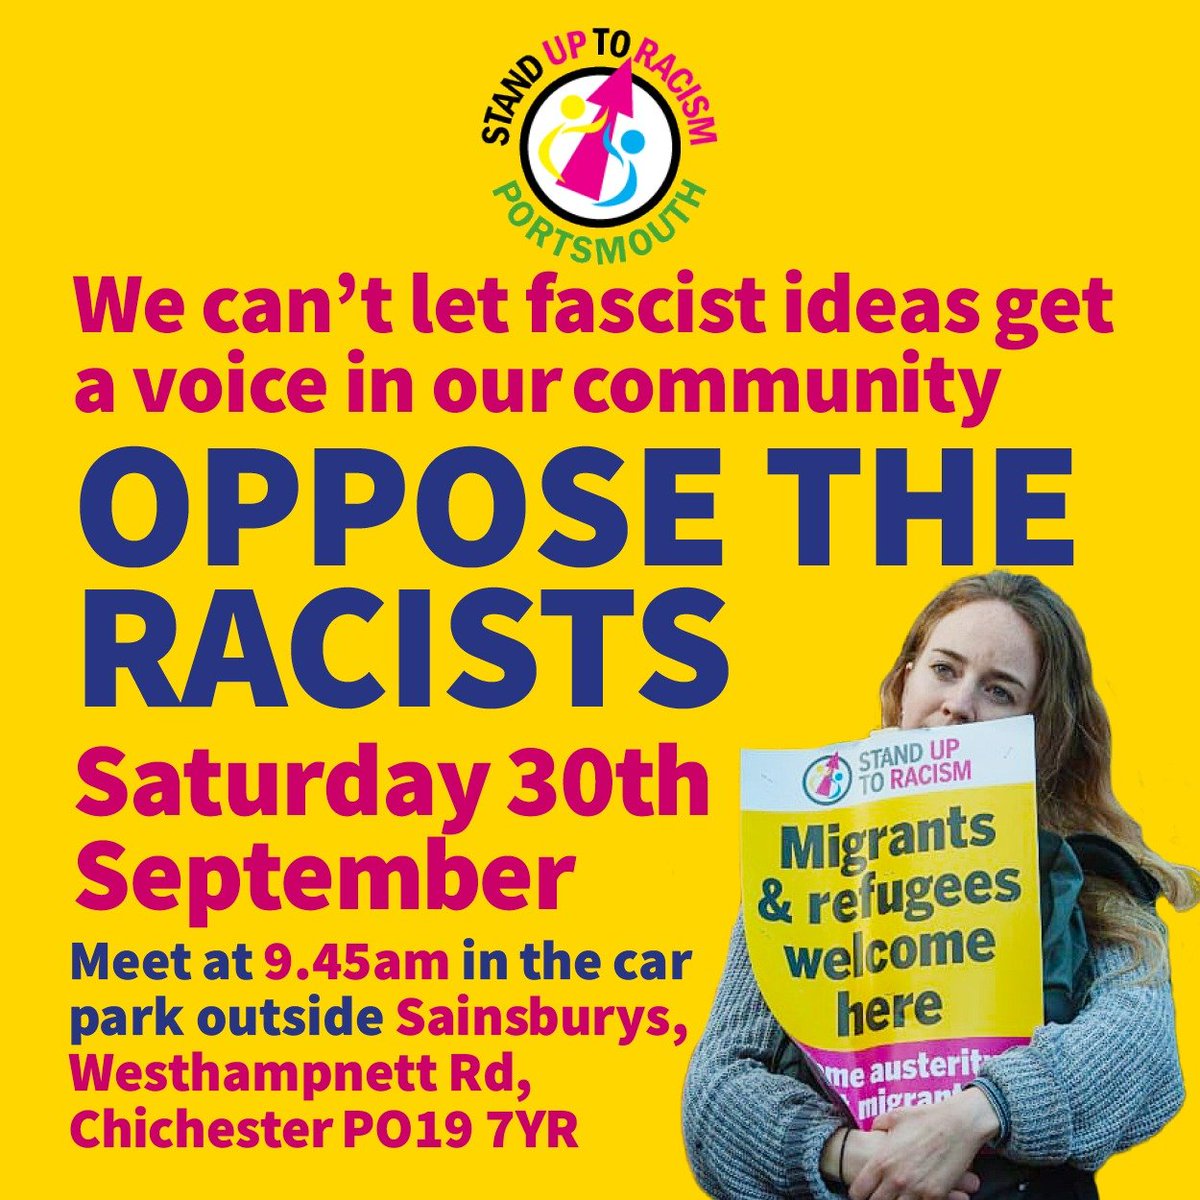 CHICHESTER. SATURDAY #opposetheracists #RefugeesWelcome